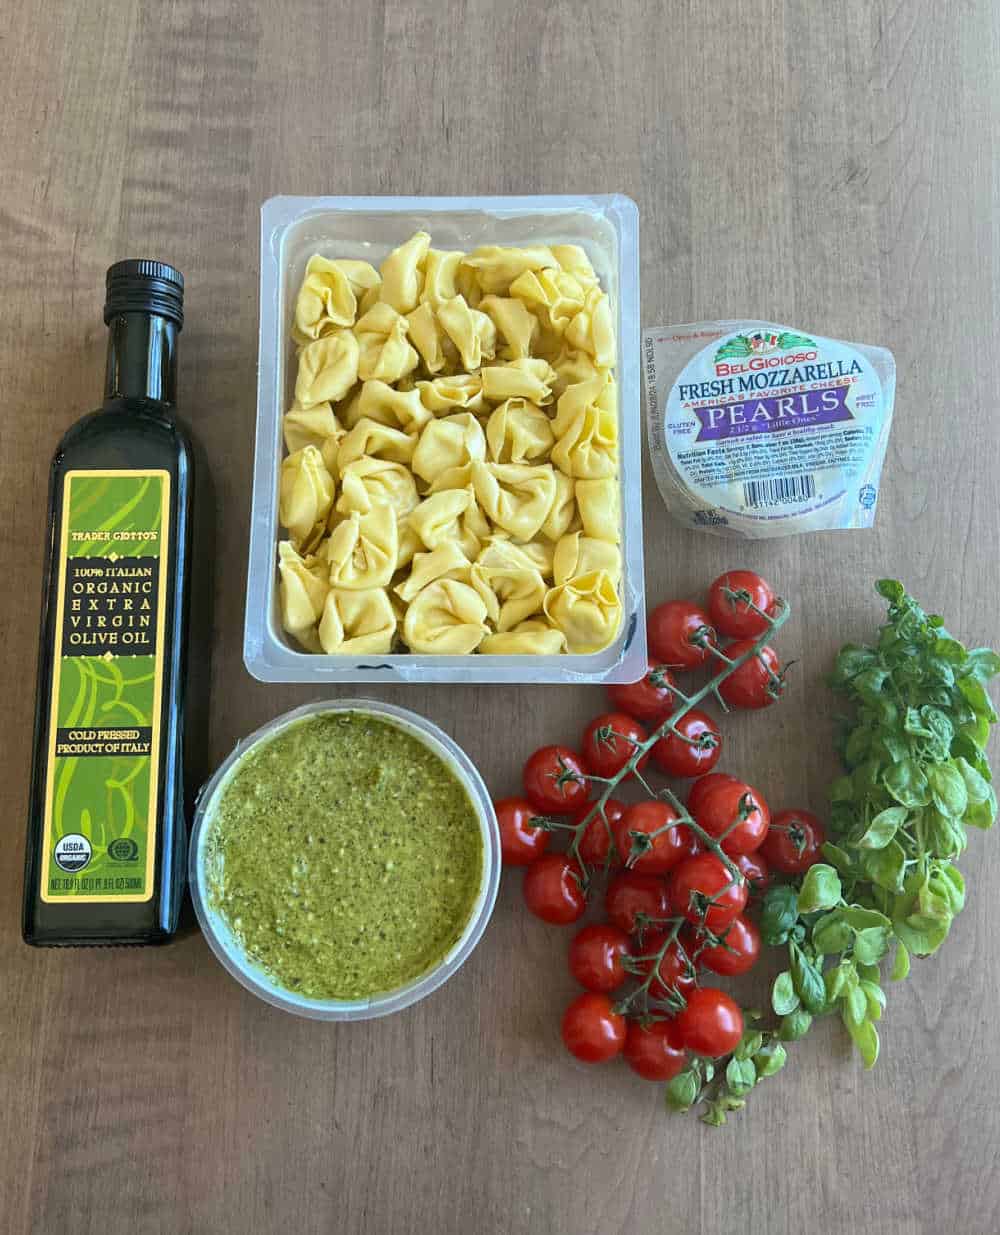 Tortellini Pasta Salad with Pesto - Meatloaf and Melodrama